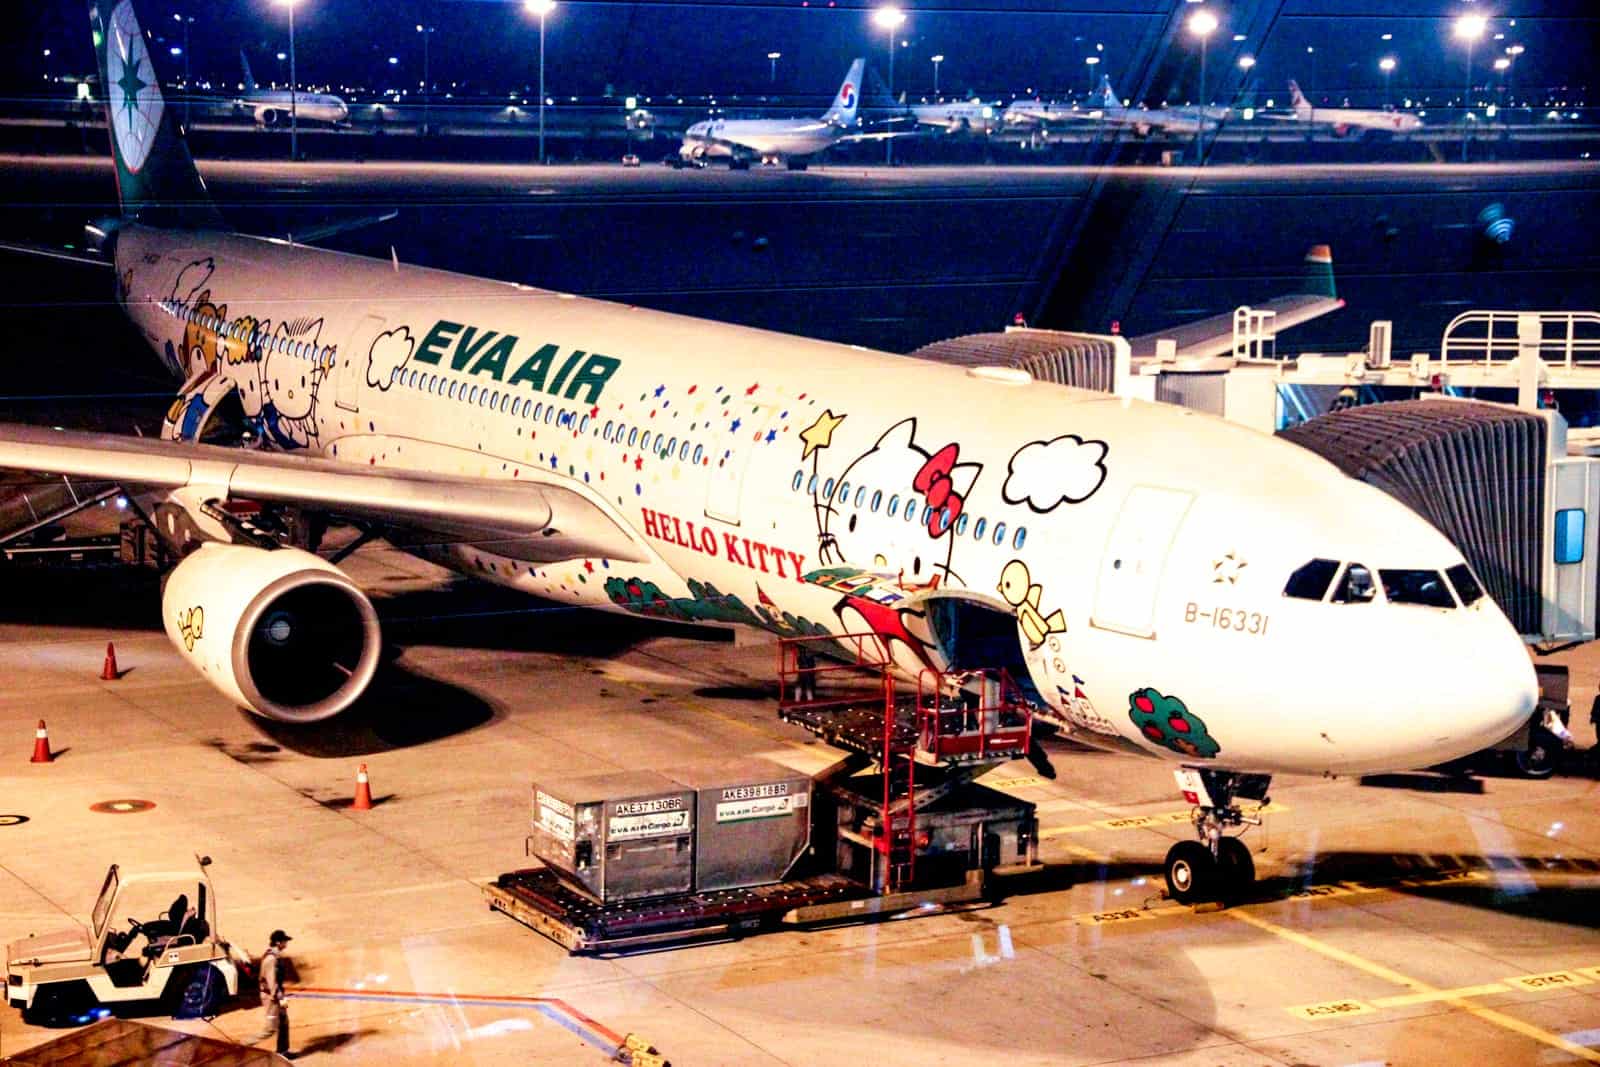 Eva Air Hello Kitty Airplane stationed at an airport